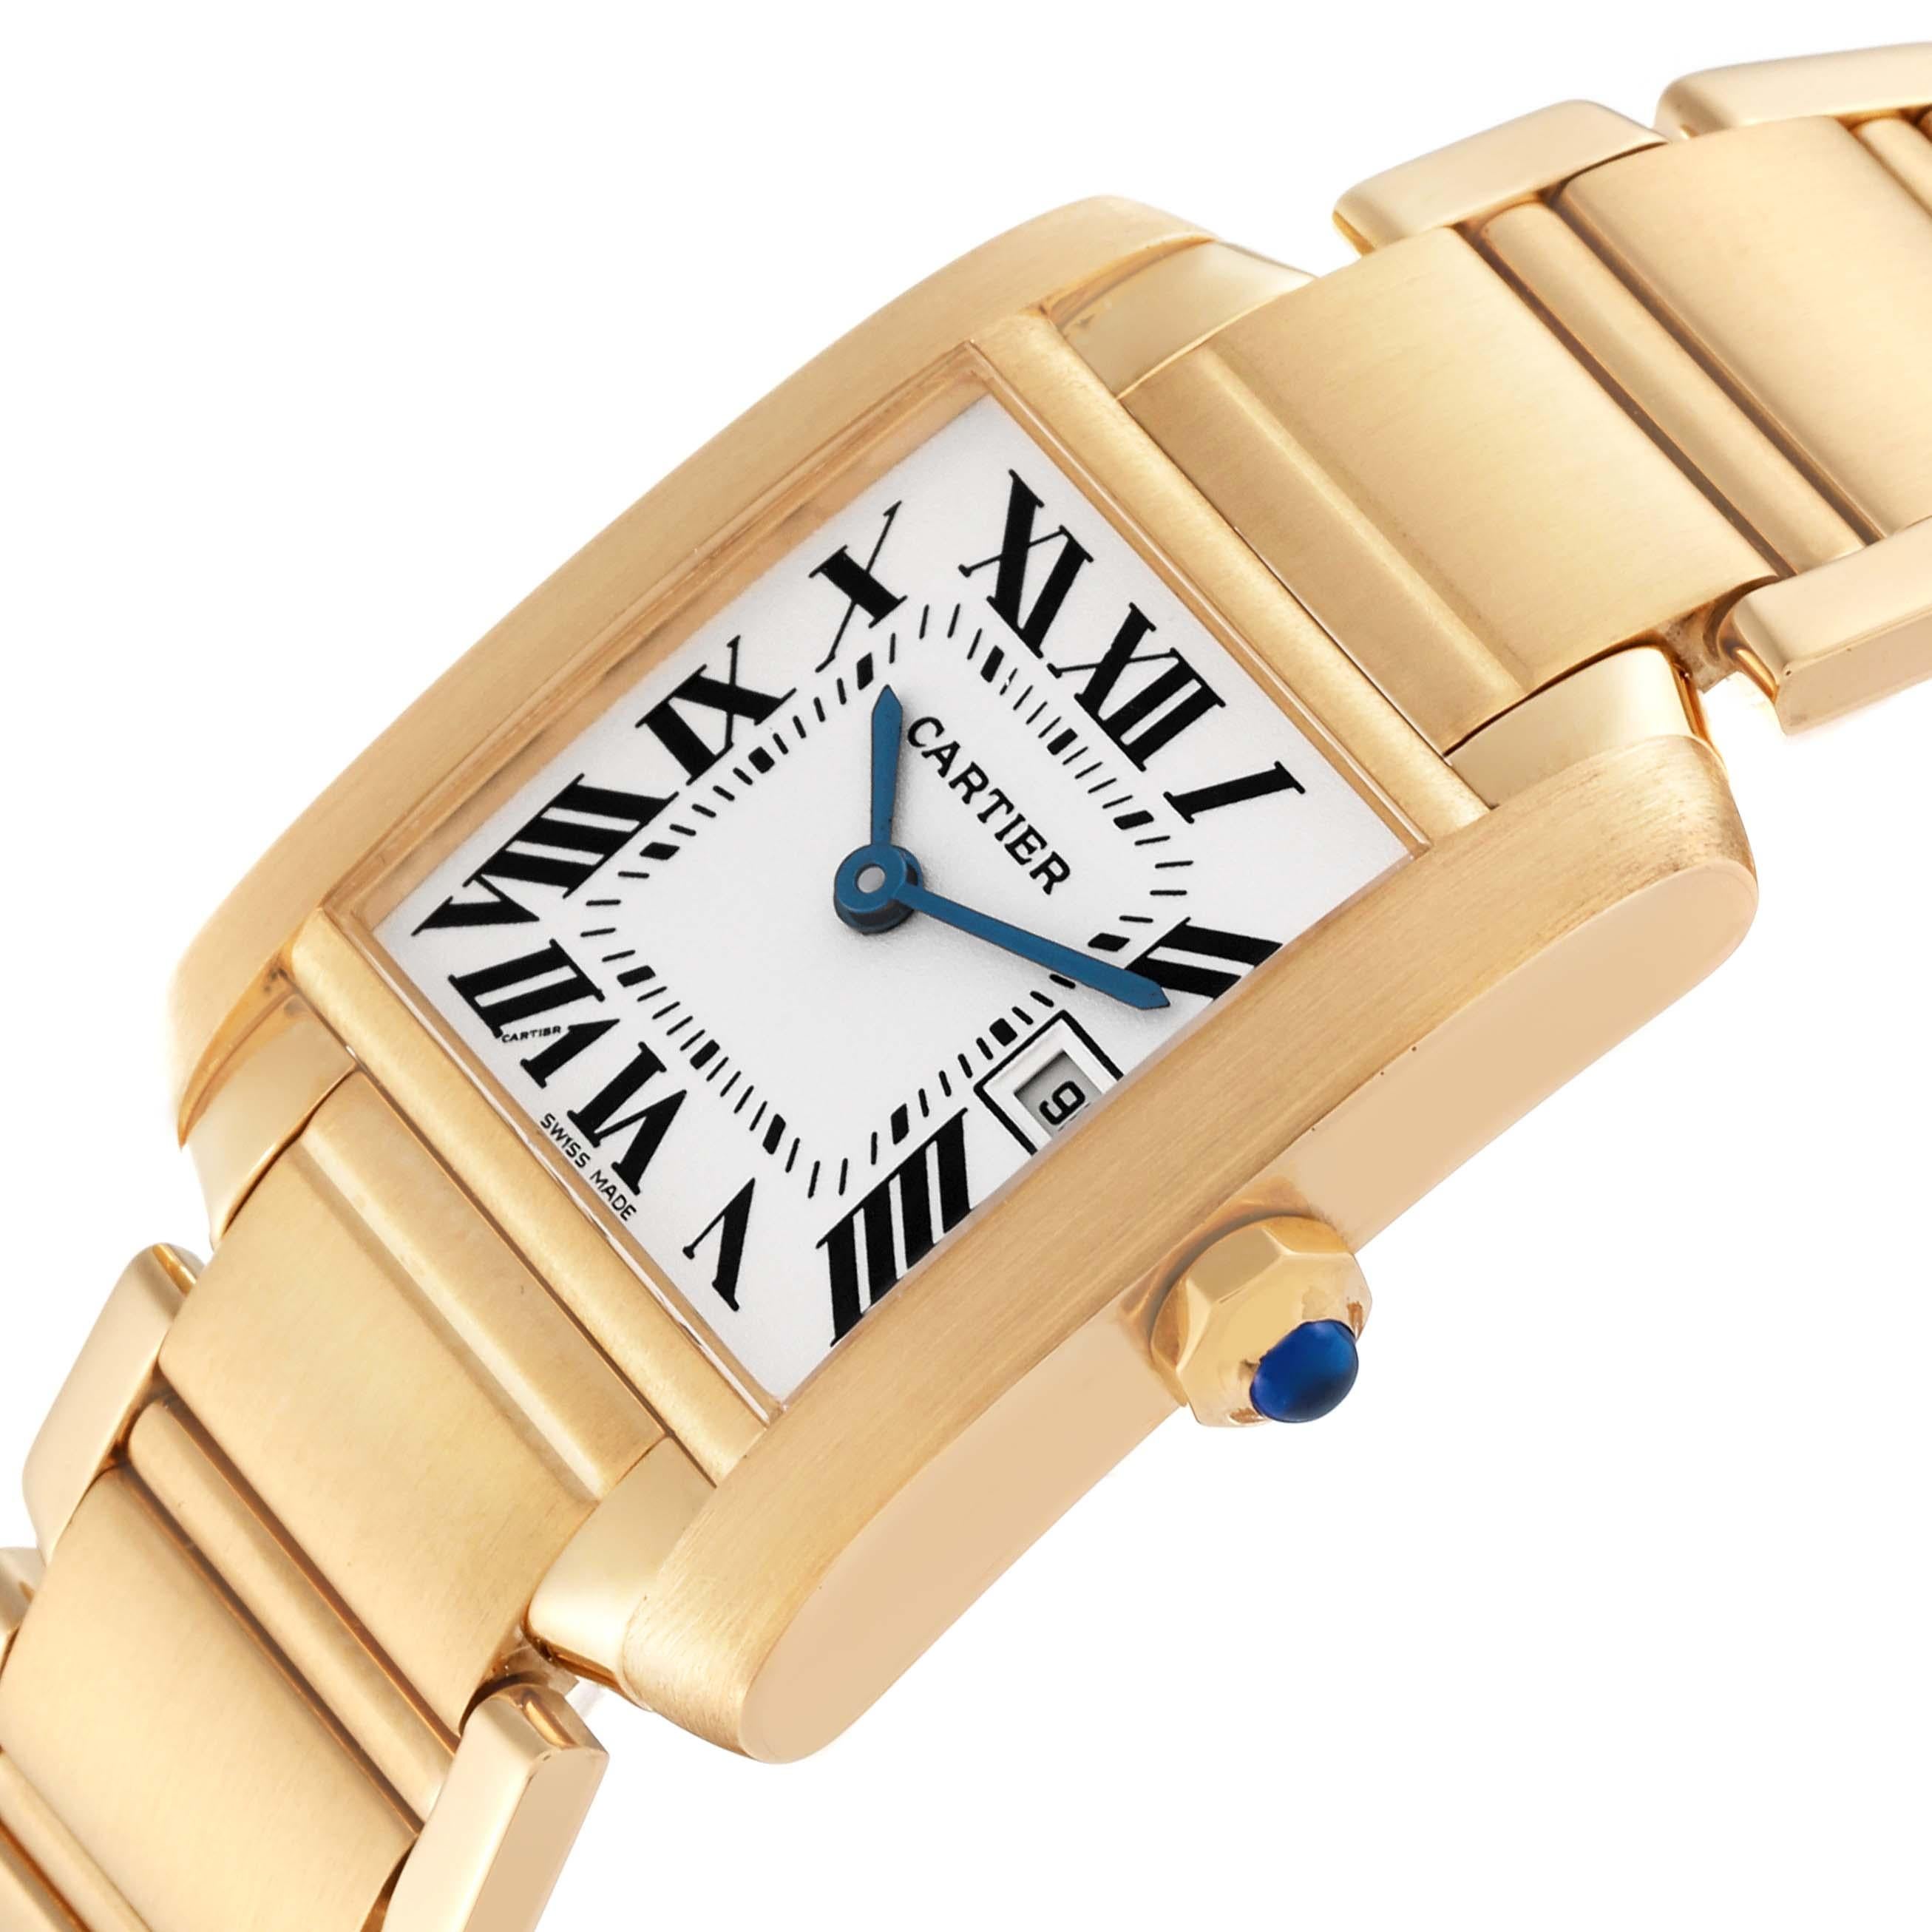 Cartier Tank Francaise Midsize Date Yellow Gold Ladies Watch W50014N2. Quartz movement. Rectangular 18K yellow gold 25.0 x 30.0 mm case. Octagonal crown set with a blue sapphire cabochon. . Scratch resistant sapphire crystal. Silvered grained dial